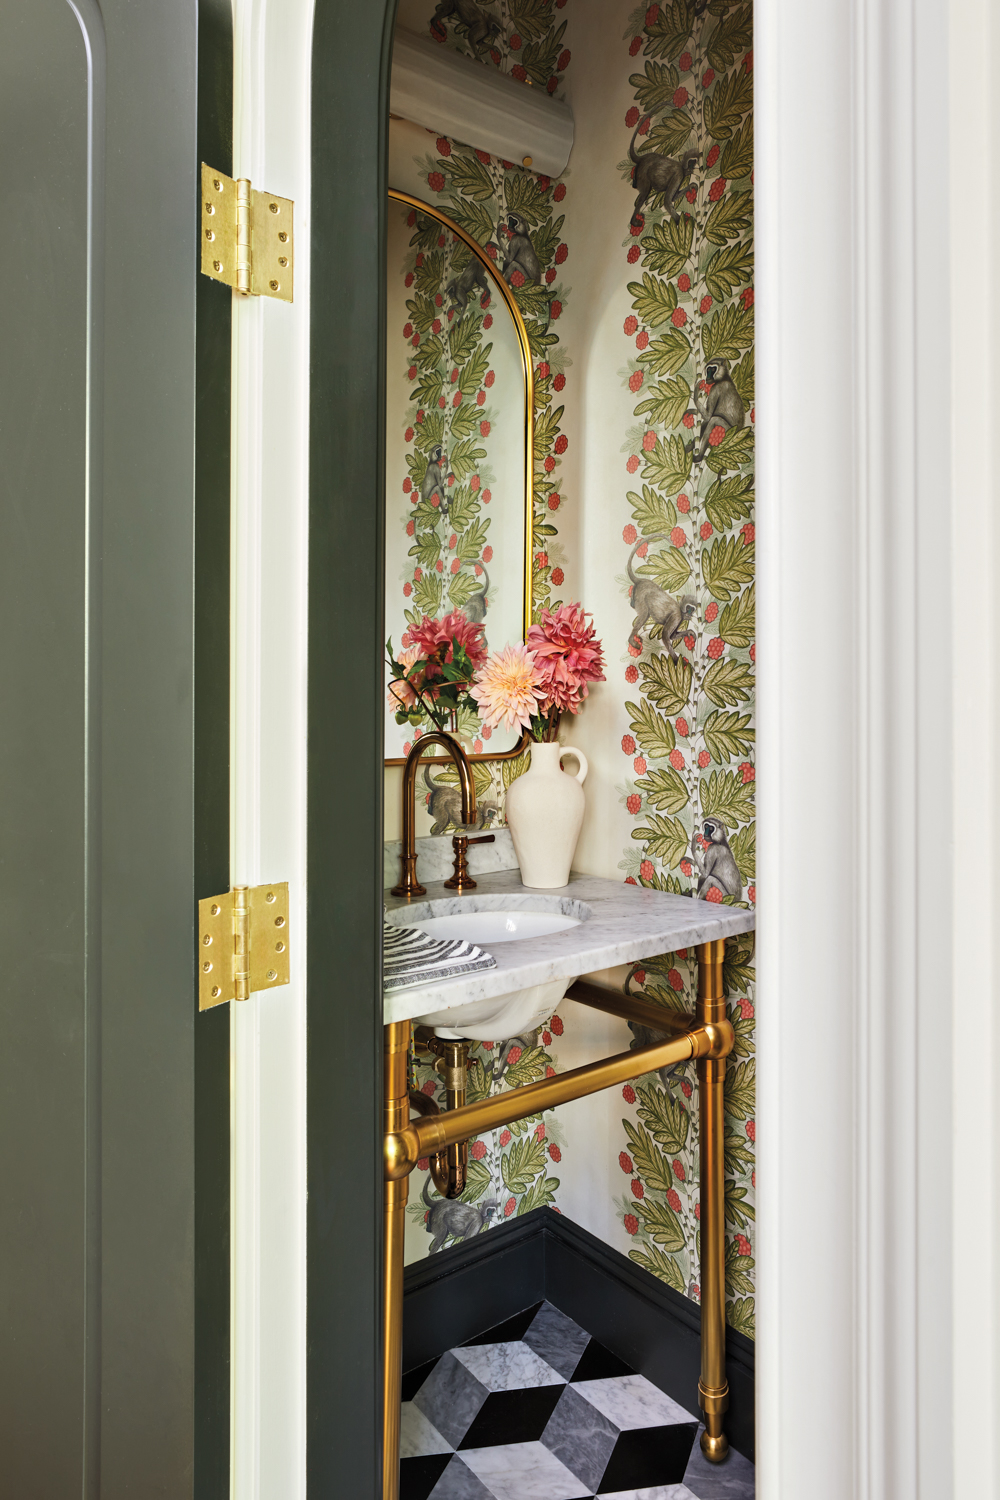 powder room with monkey wallpaper...